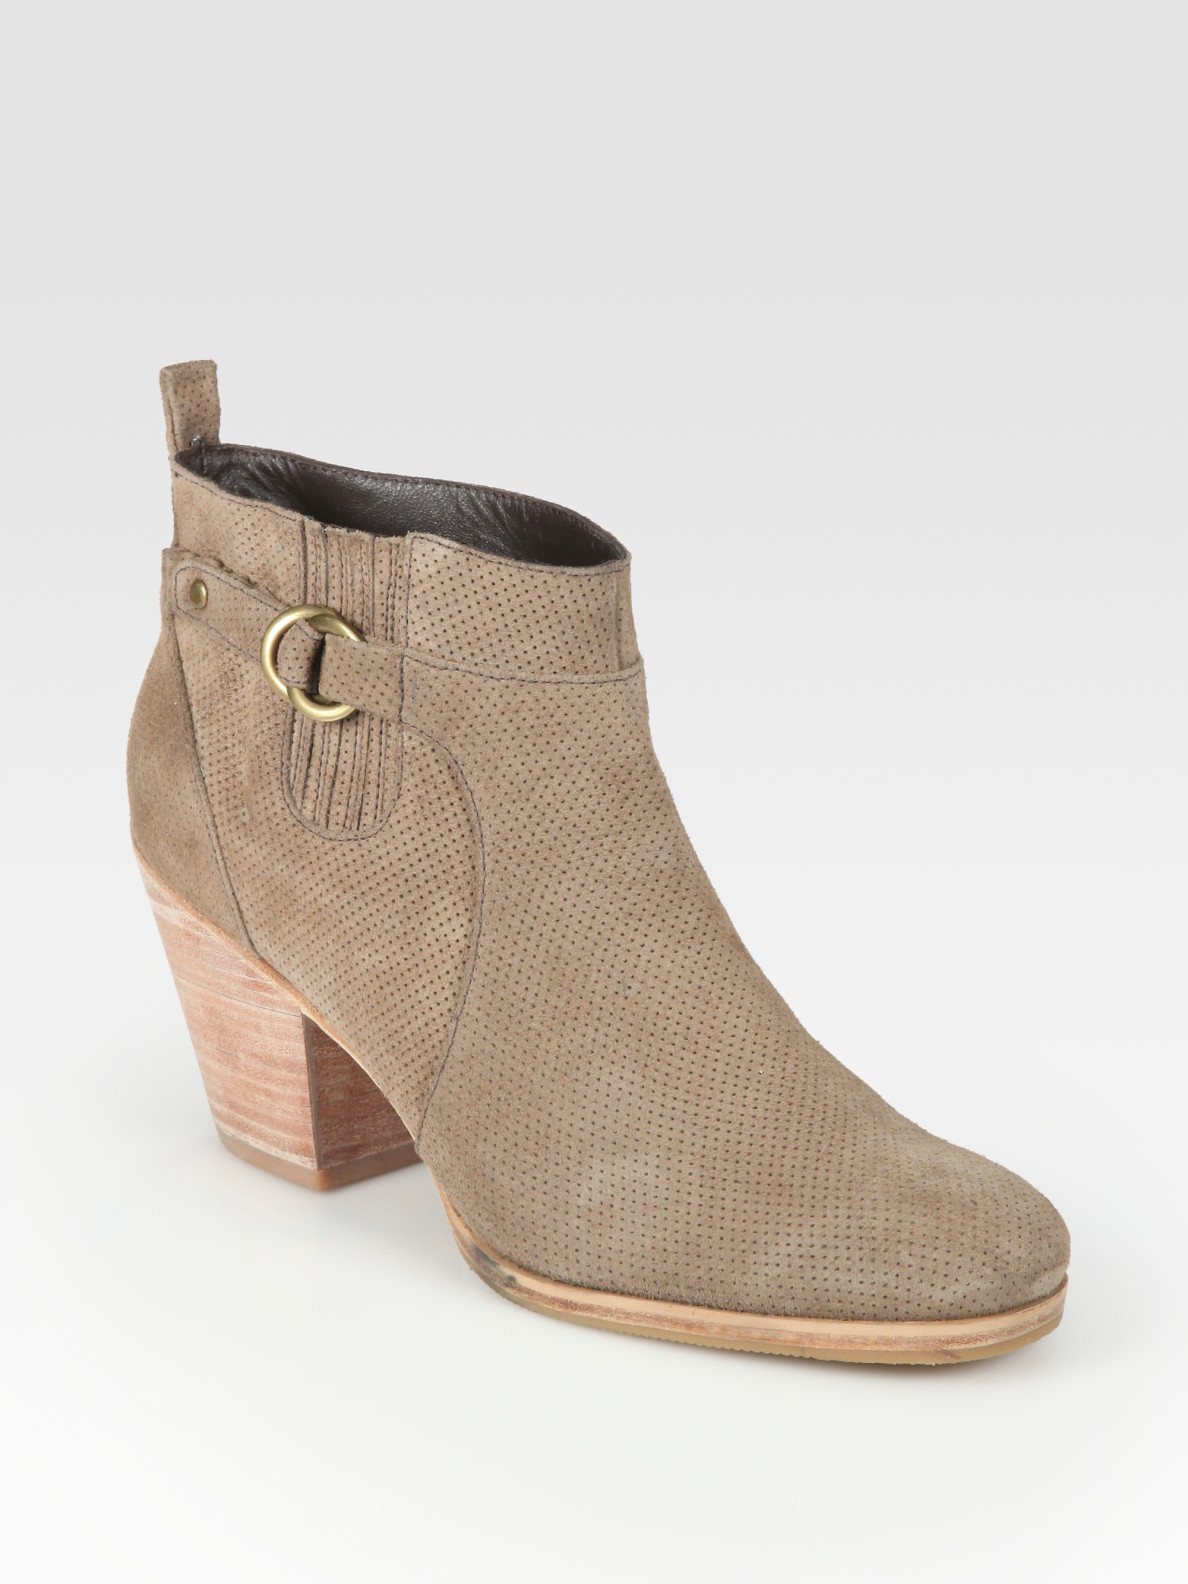 Lyst - Rachel Comey Perforated Suede Ankle Boots in Natural